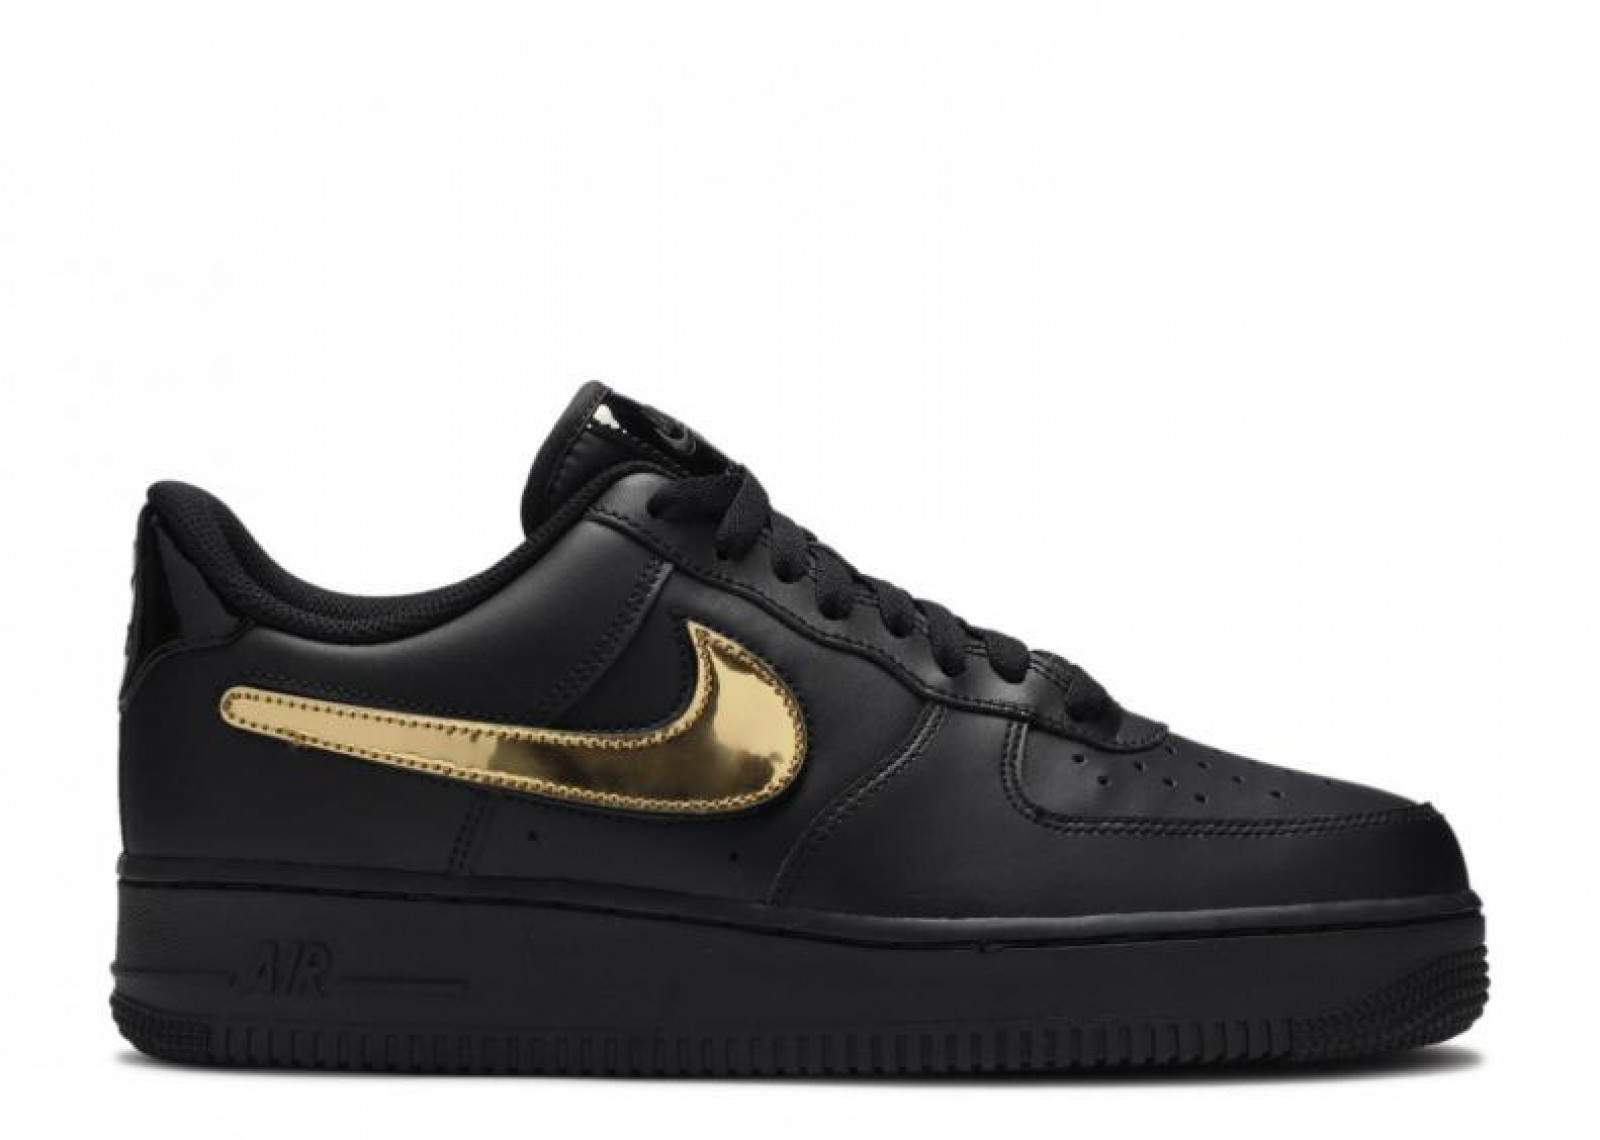 AIR FORCE 1 LOW "BLACK REMOVABLE SWOOSH" image 1